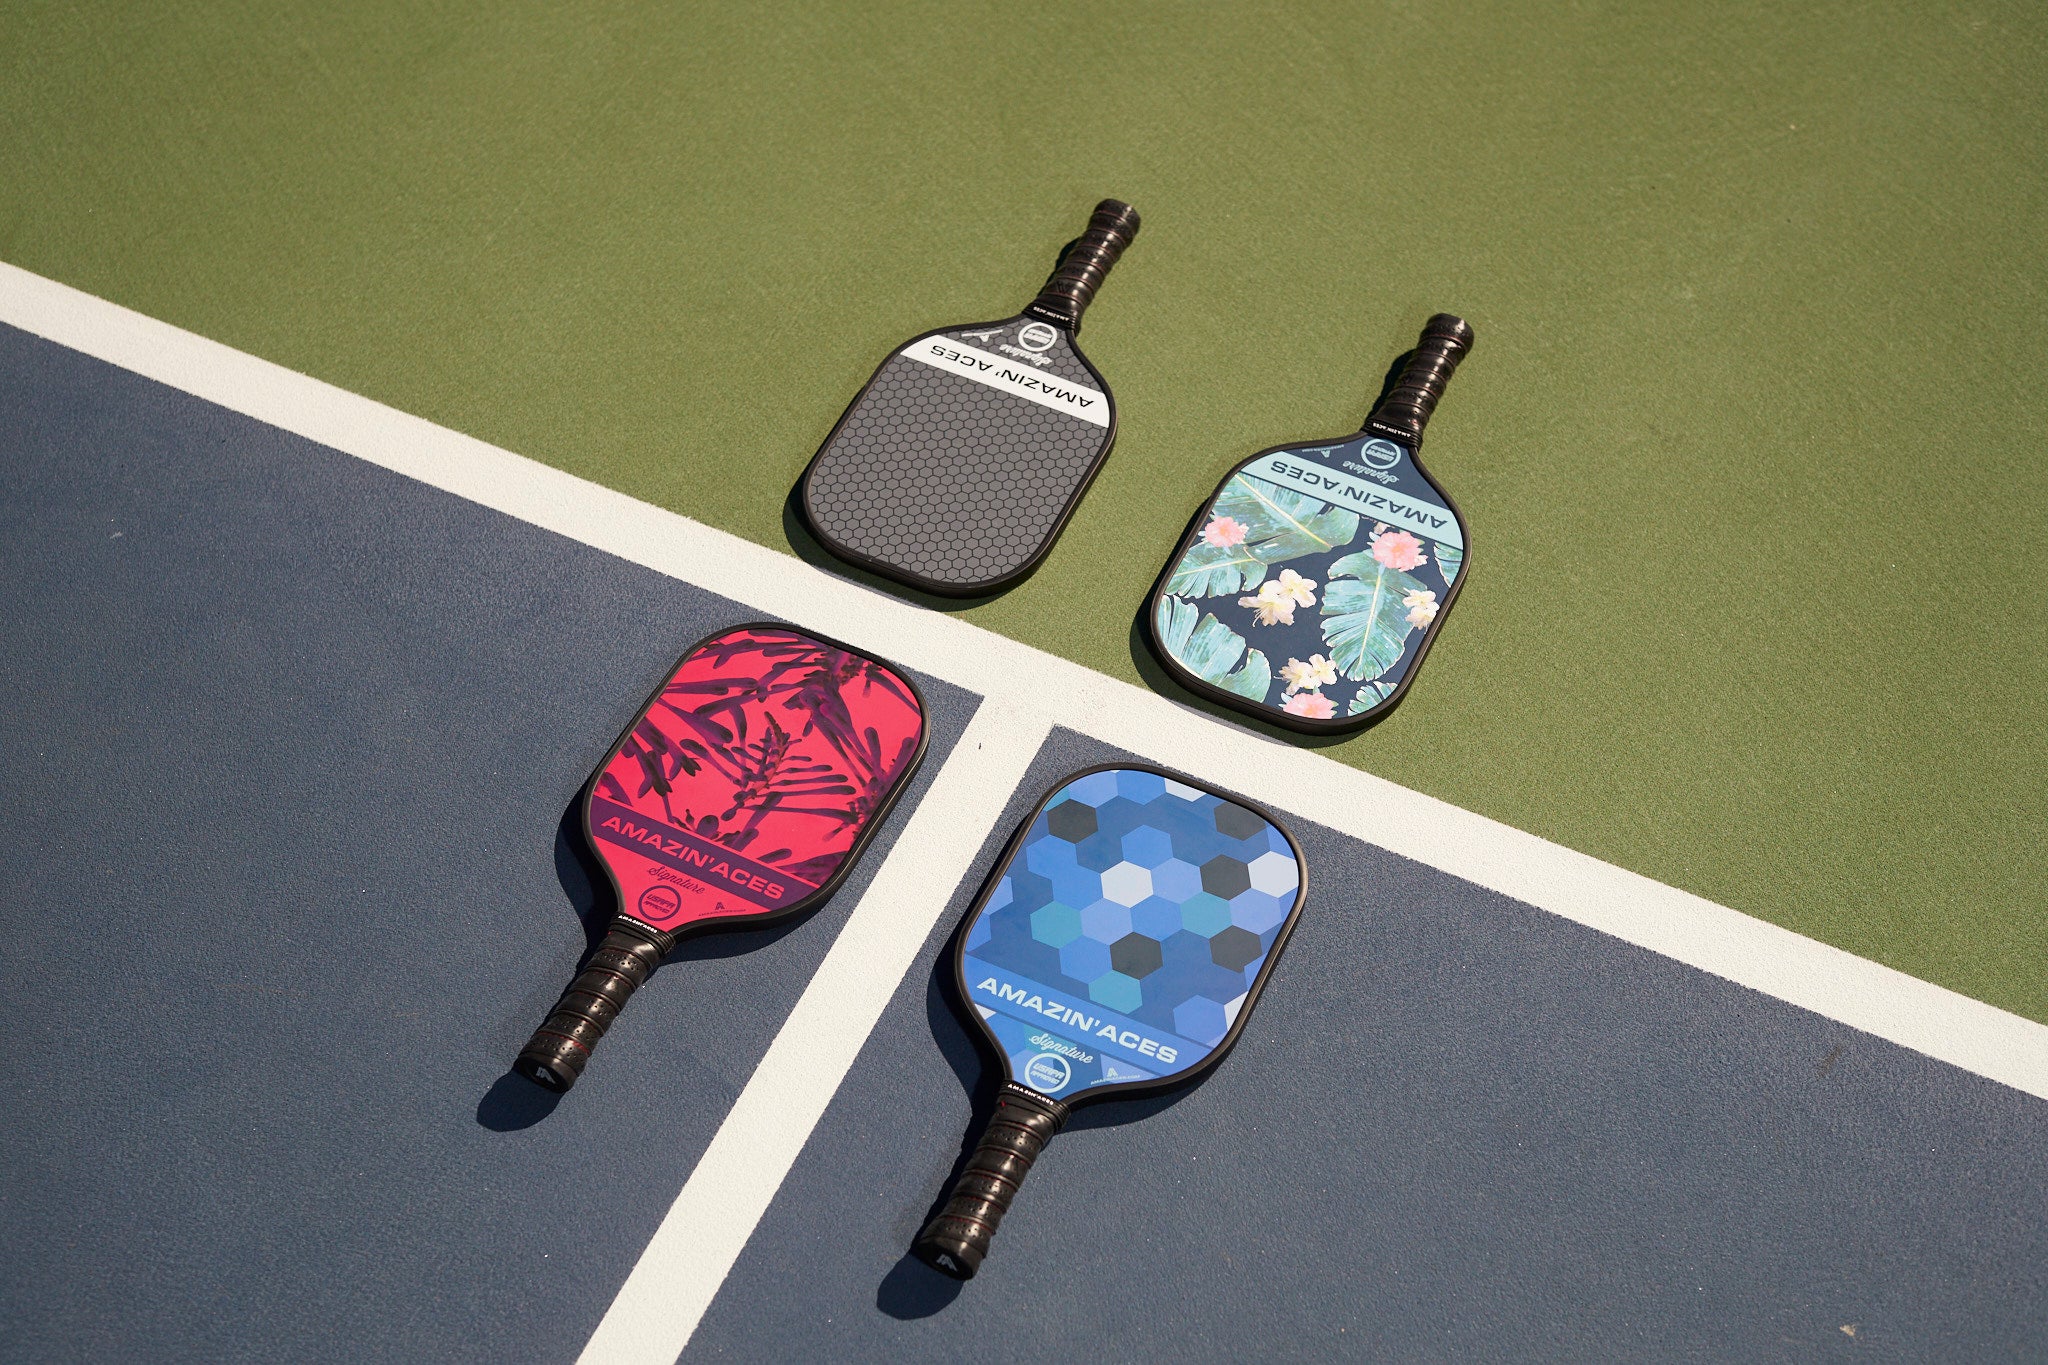 The Complete Pickleball Paddle Guide for Beginners: What You Need to Get Started Playing